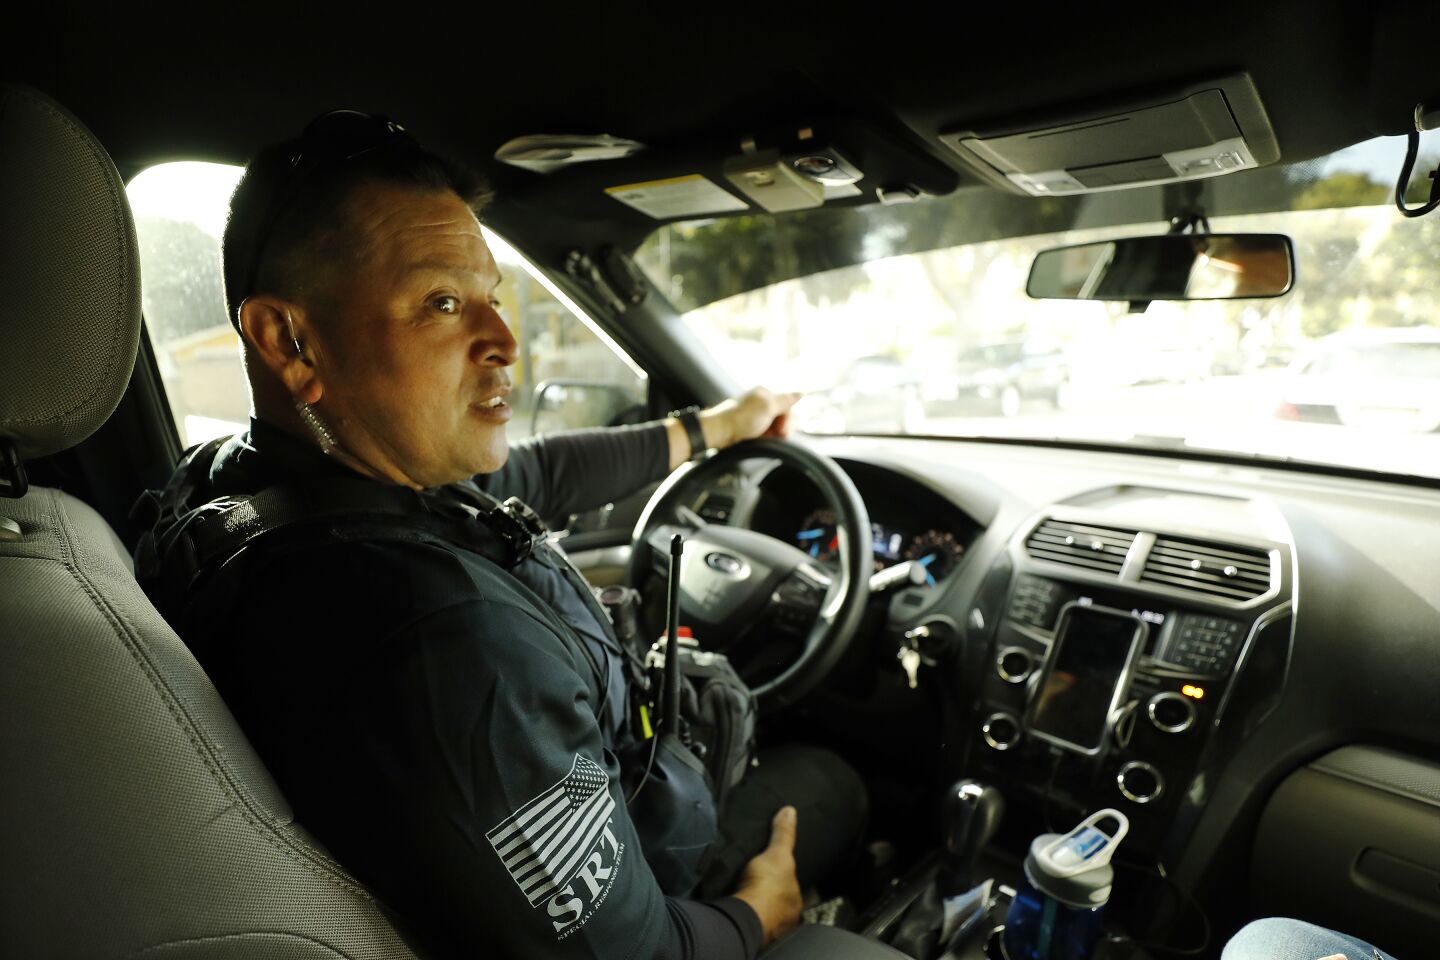 A law enforcement officer at the wheel